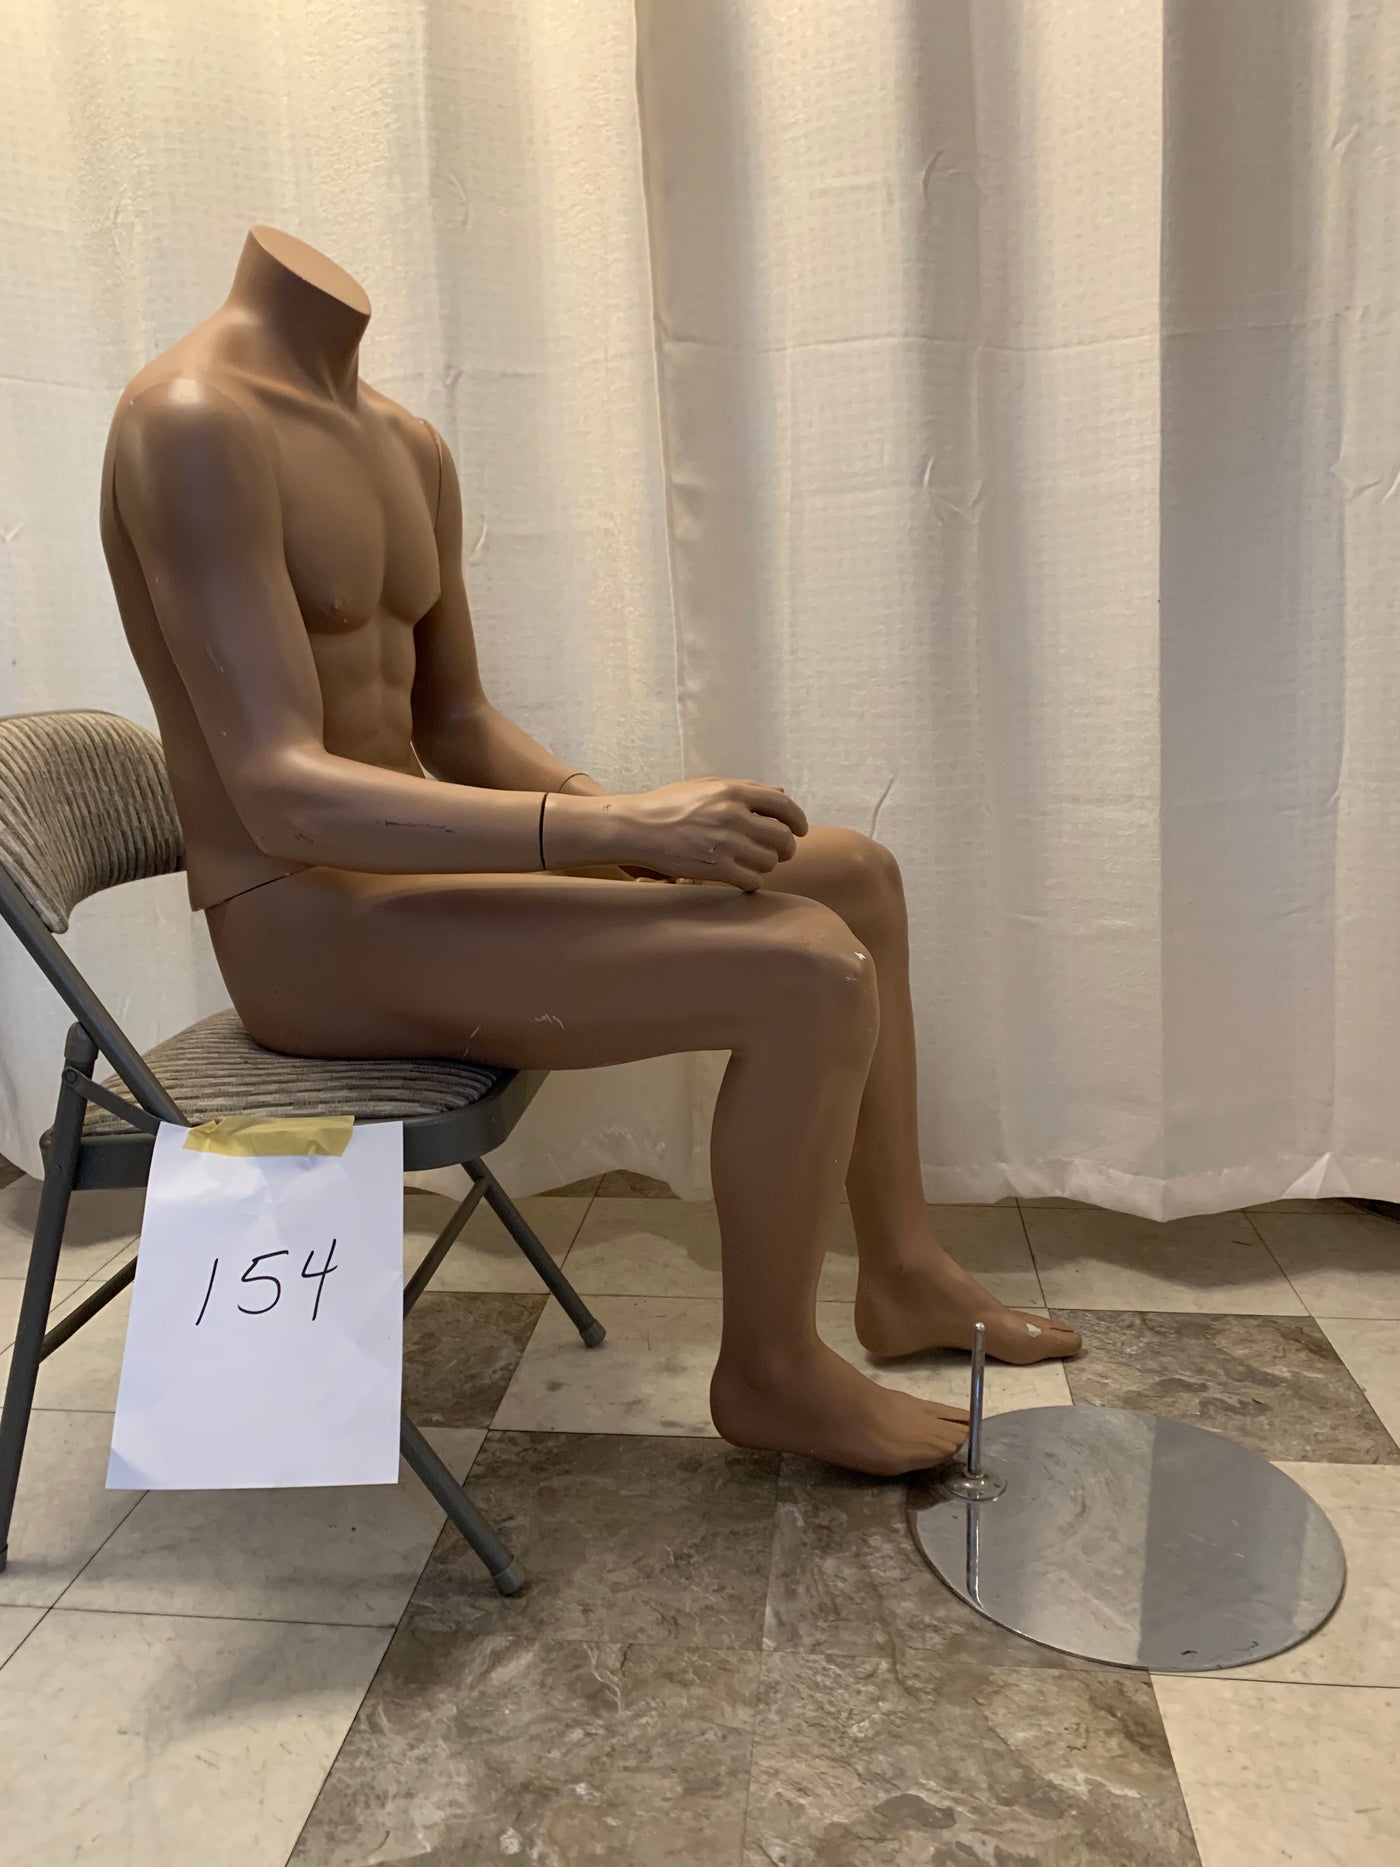 Used Headless Seated Male Mannequin - #154